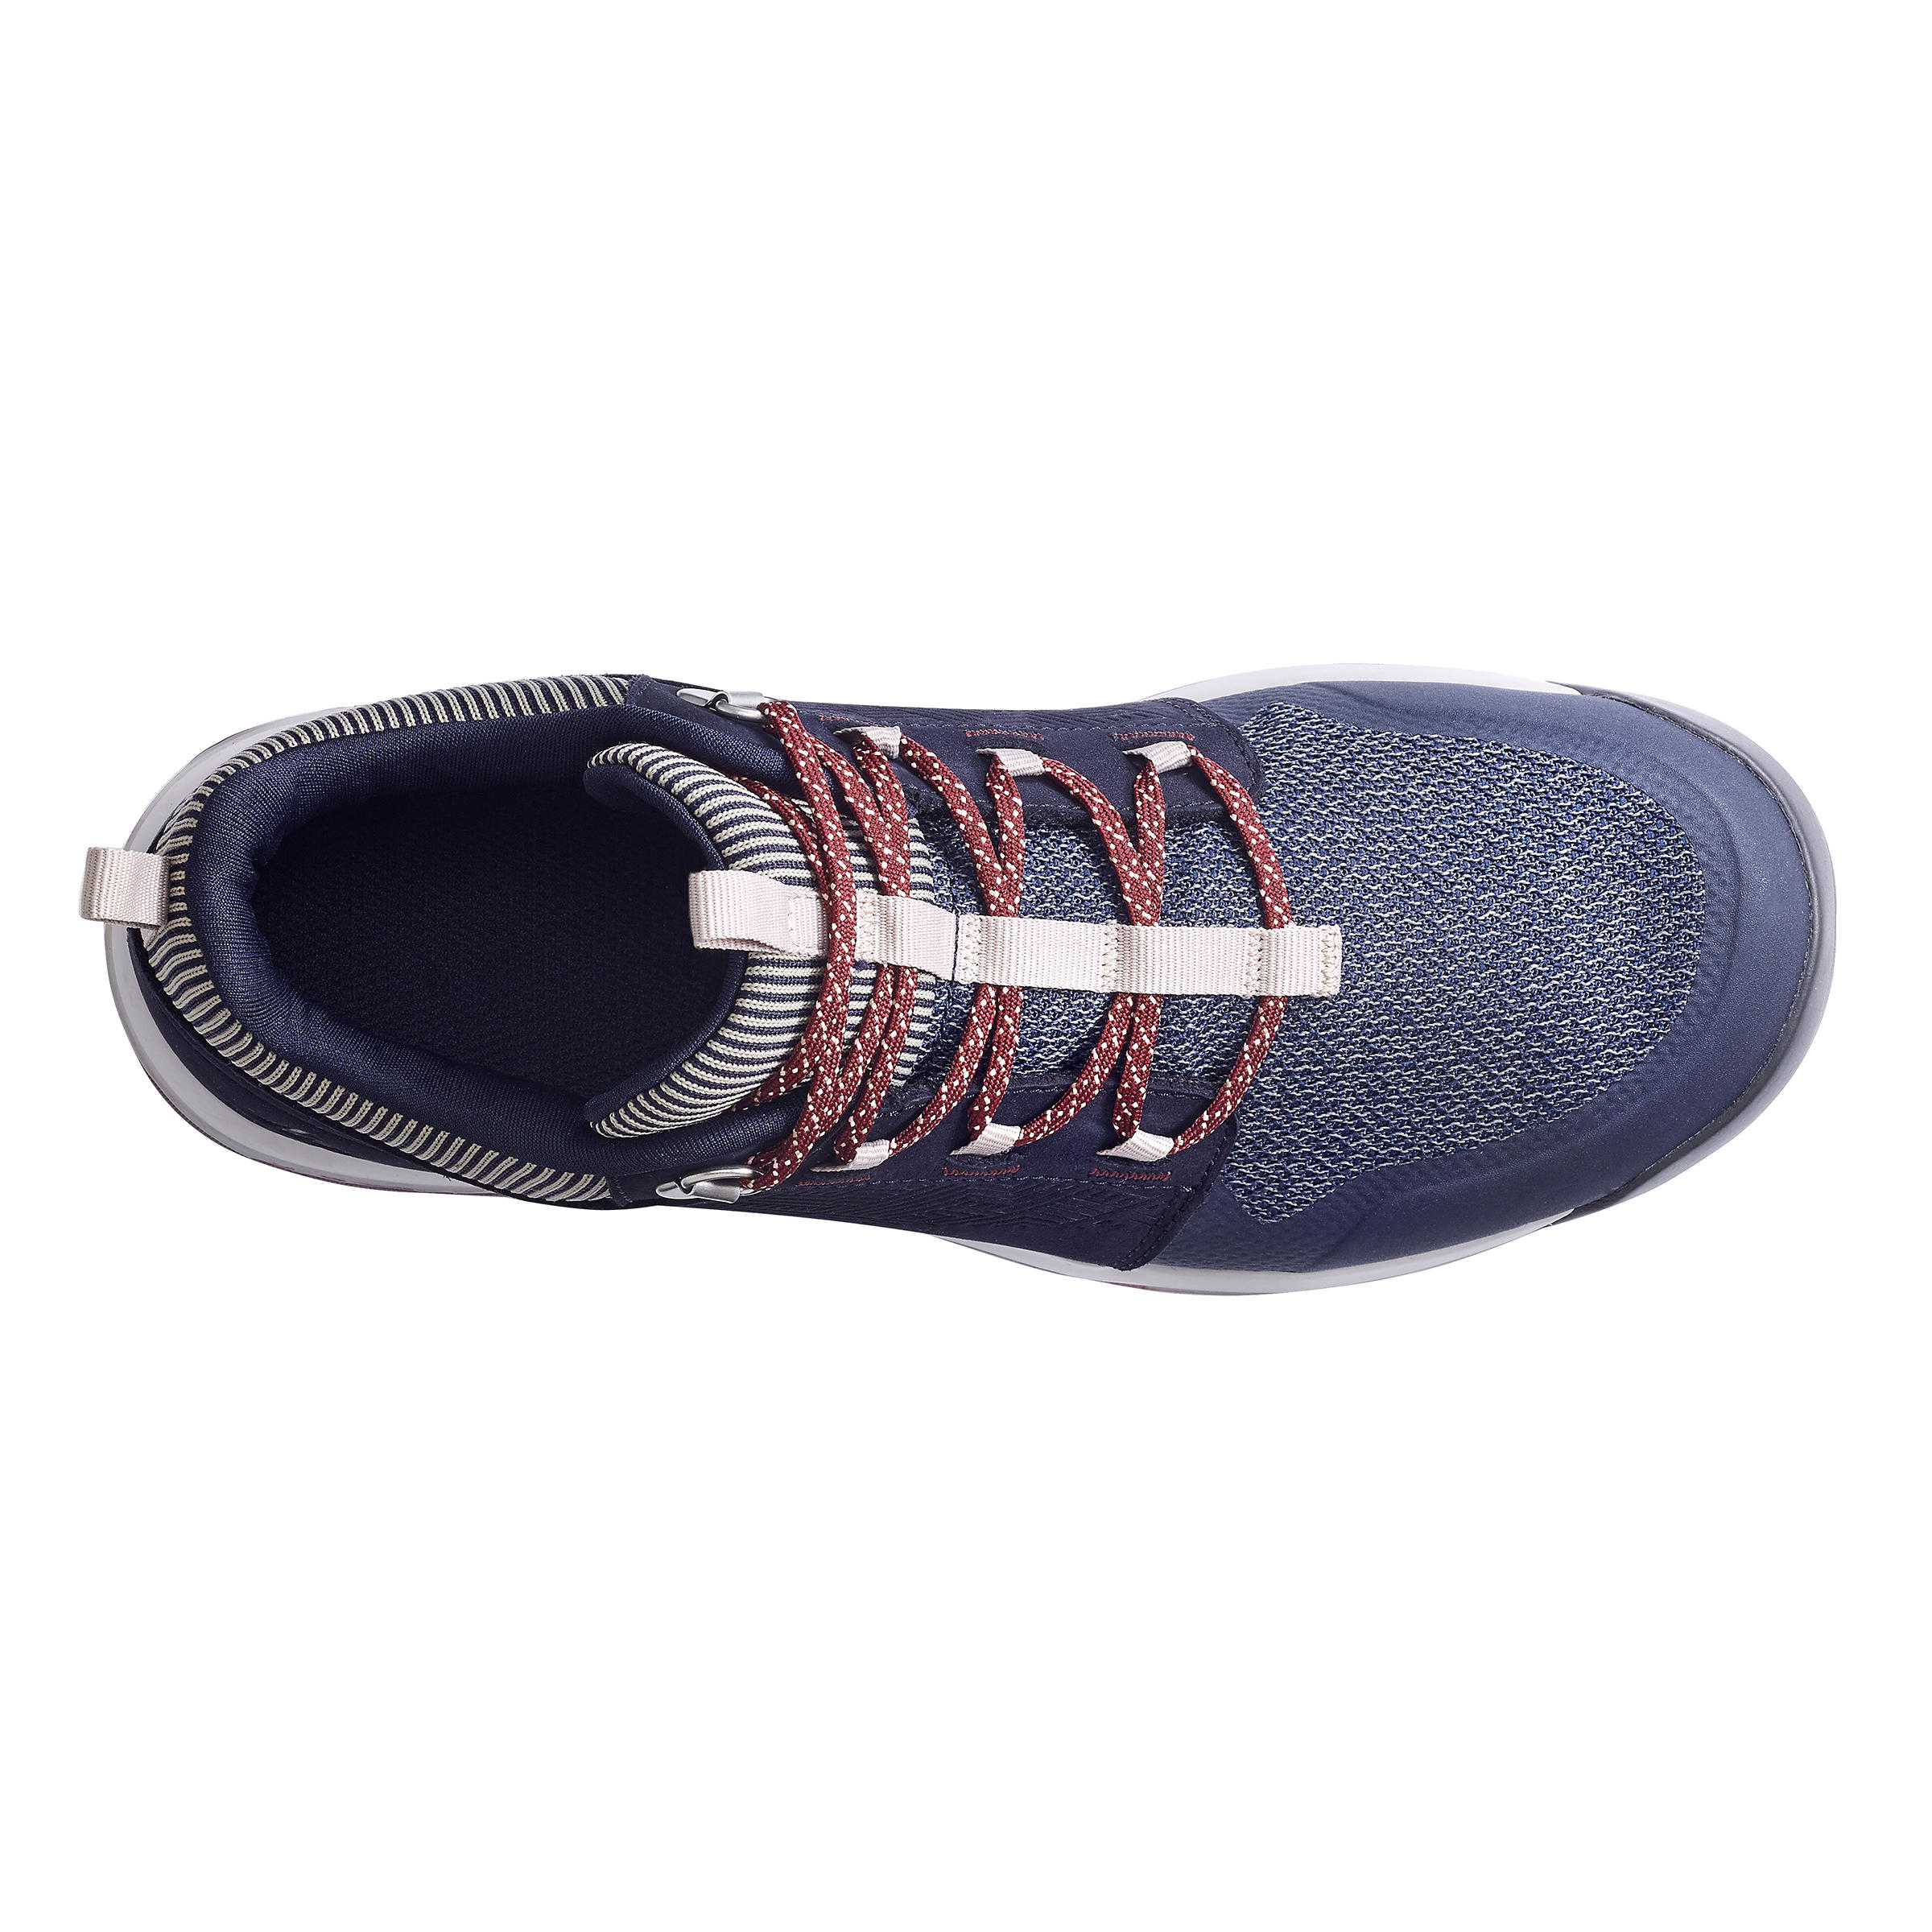 Women's Eco-Friendly Country Walking Shoes - Navy 9/9